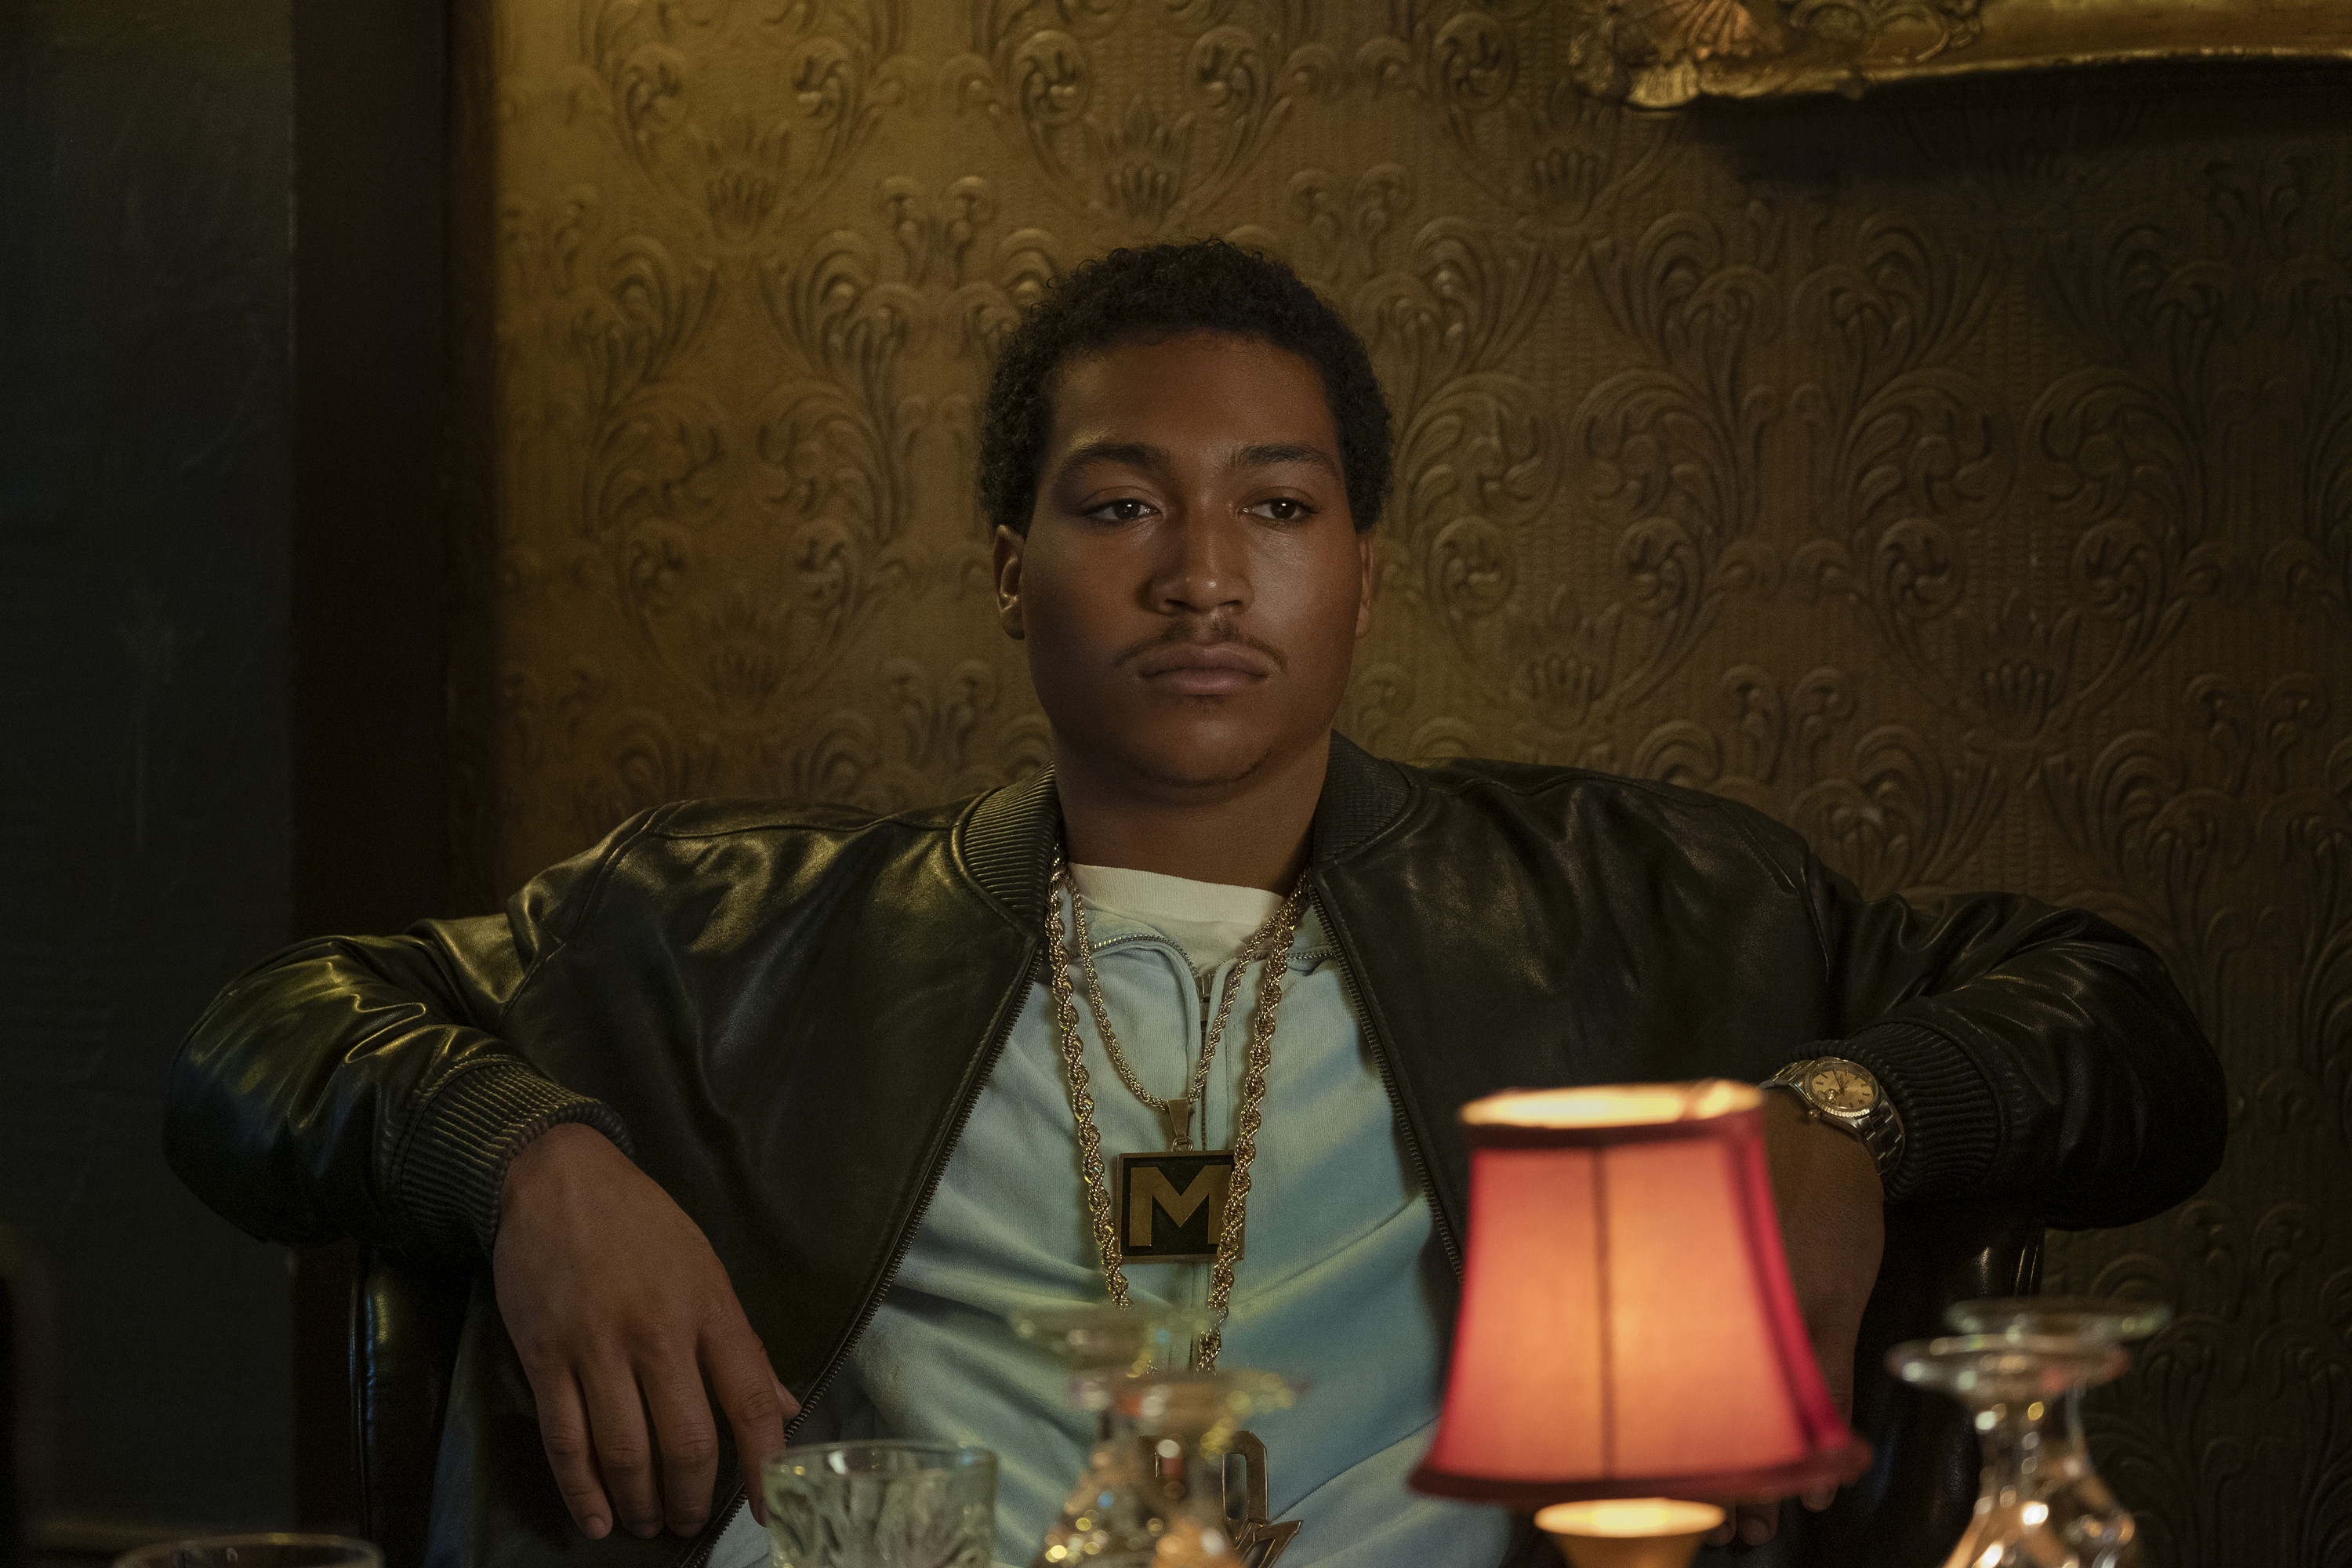 Demetrius “Lil Meech” Flenory Jr. as Demetrius “Big Meech” Flenory sitting at a table looking stoic while wearing gold chains in 'BMF'